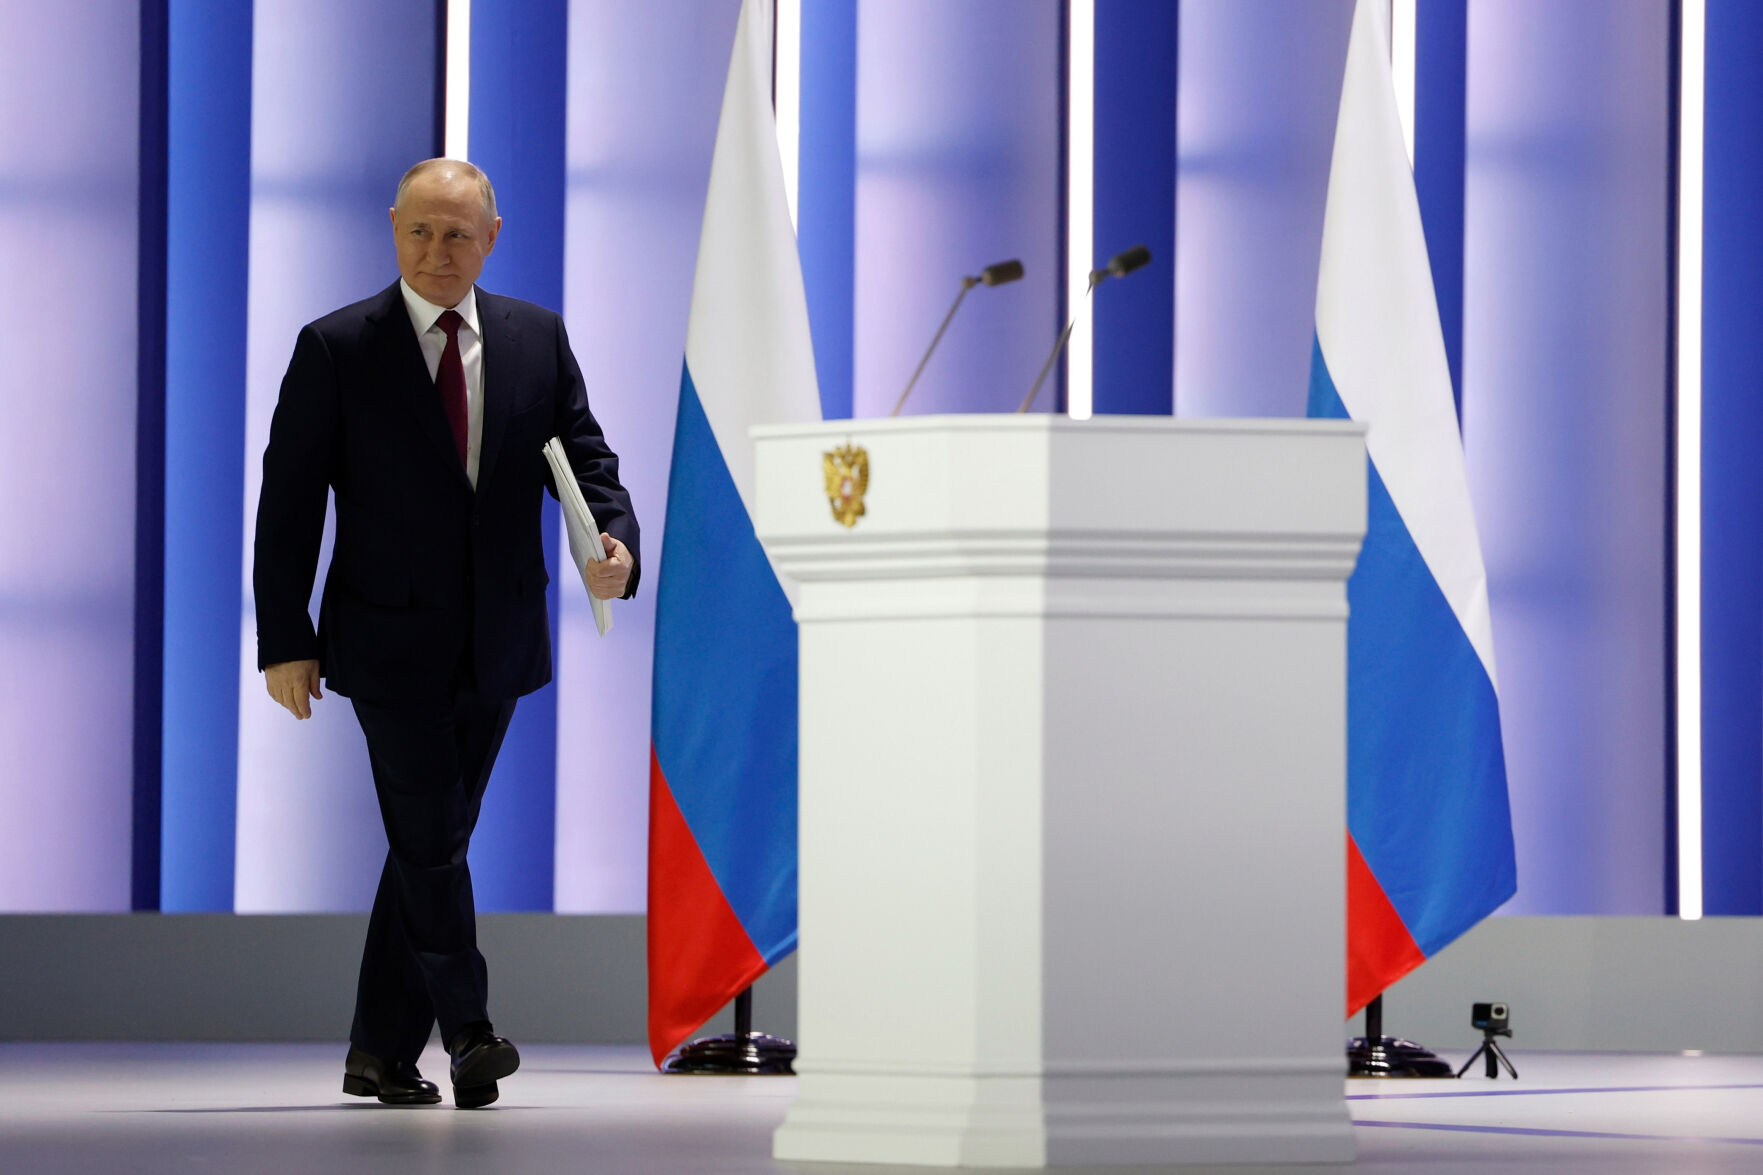 <p>Russian President Vladimir Putin arrives to give his annual state of the nation address in Moscow, Russia, Tuesday, Feb. 21, 2023. (Dmitry Astakhov, Sputnik, Kremlin Pool Photo via AP)</p>   PHOTO CREDIT: Dmitry Astakhov 